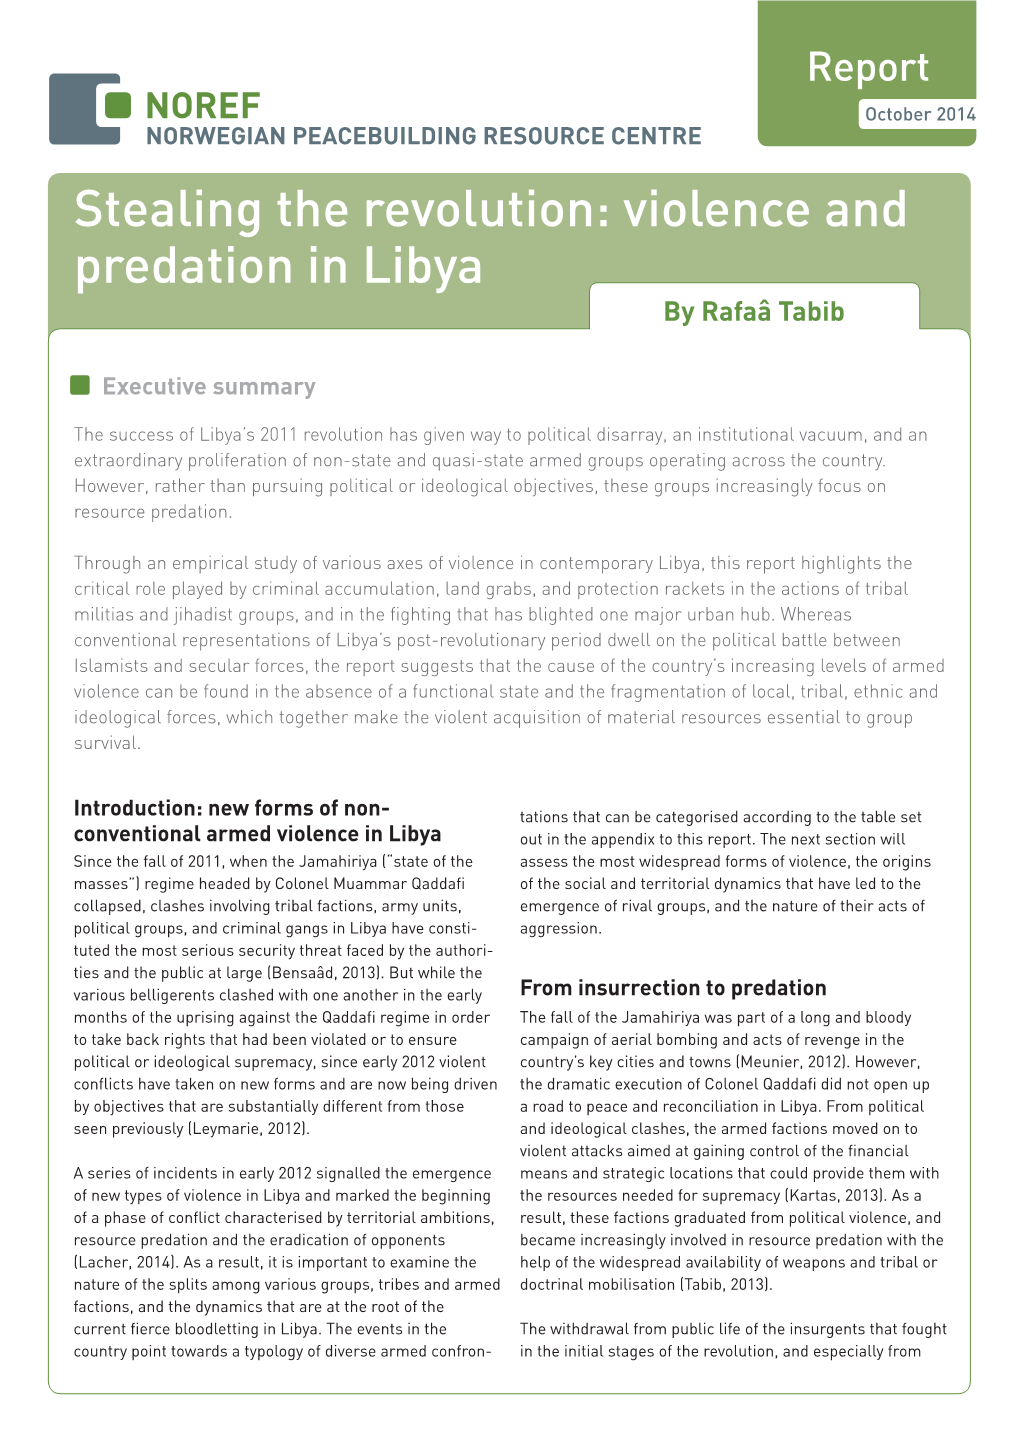 Stealing the Revolution: Violence and Predation in Libya